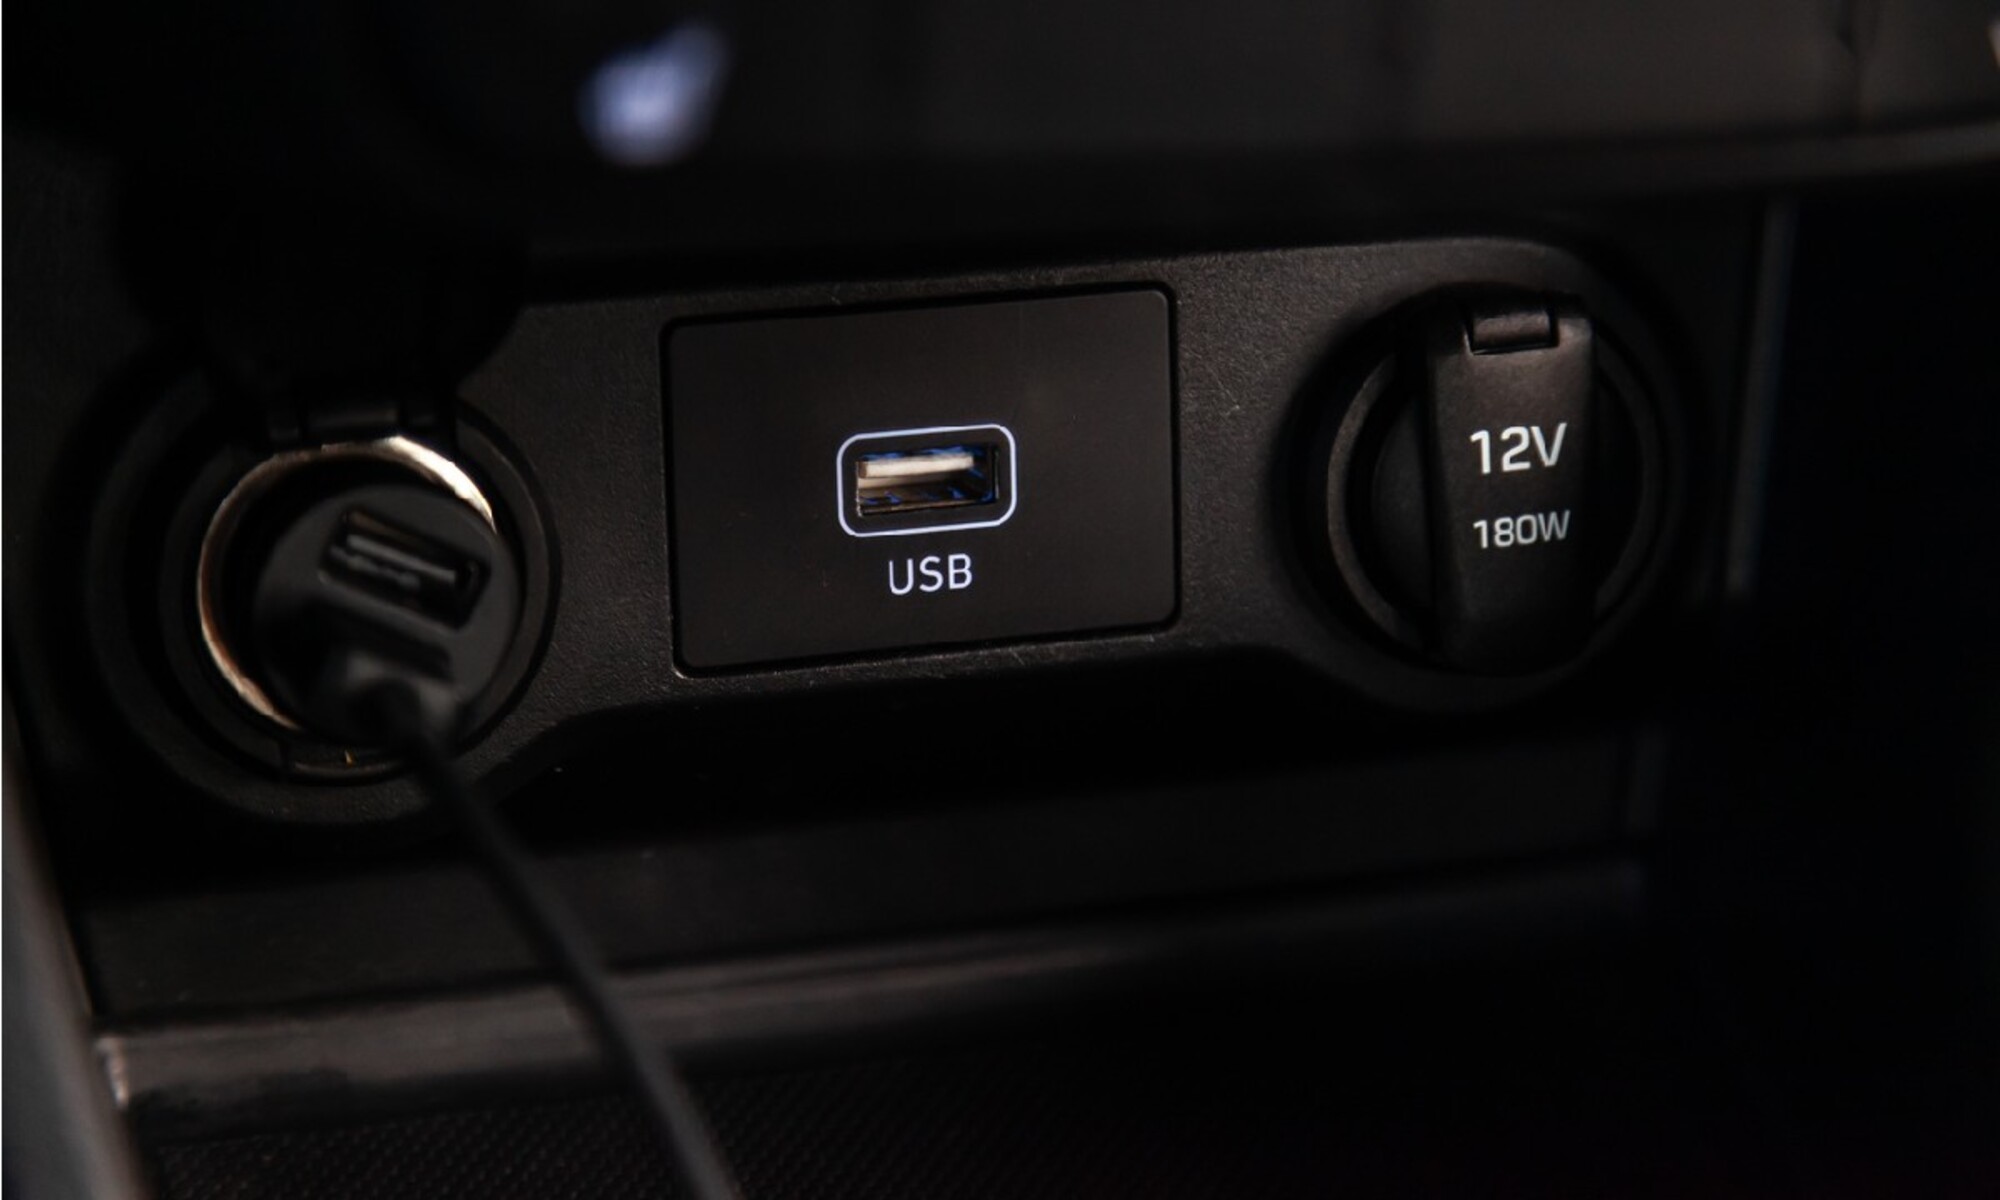 How To Listen To Music In A Car From A USB Flash Drive